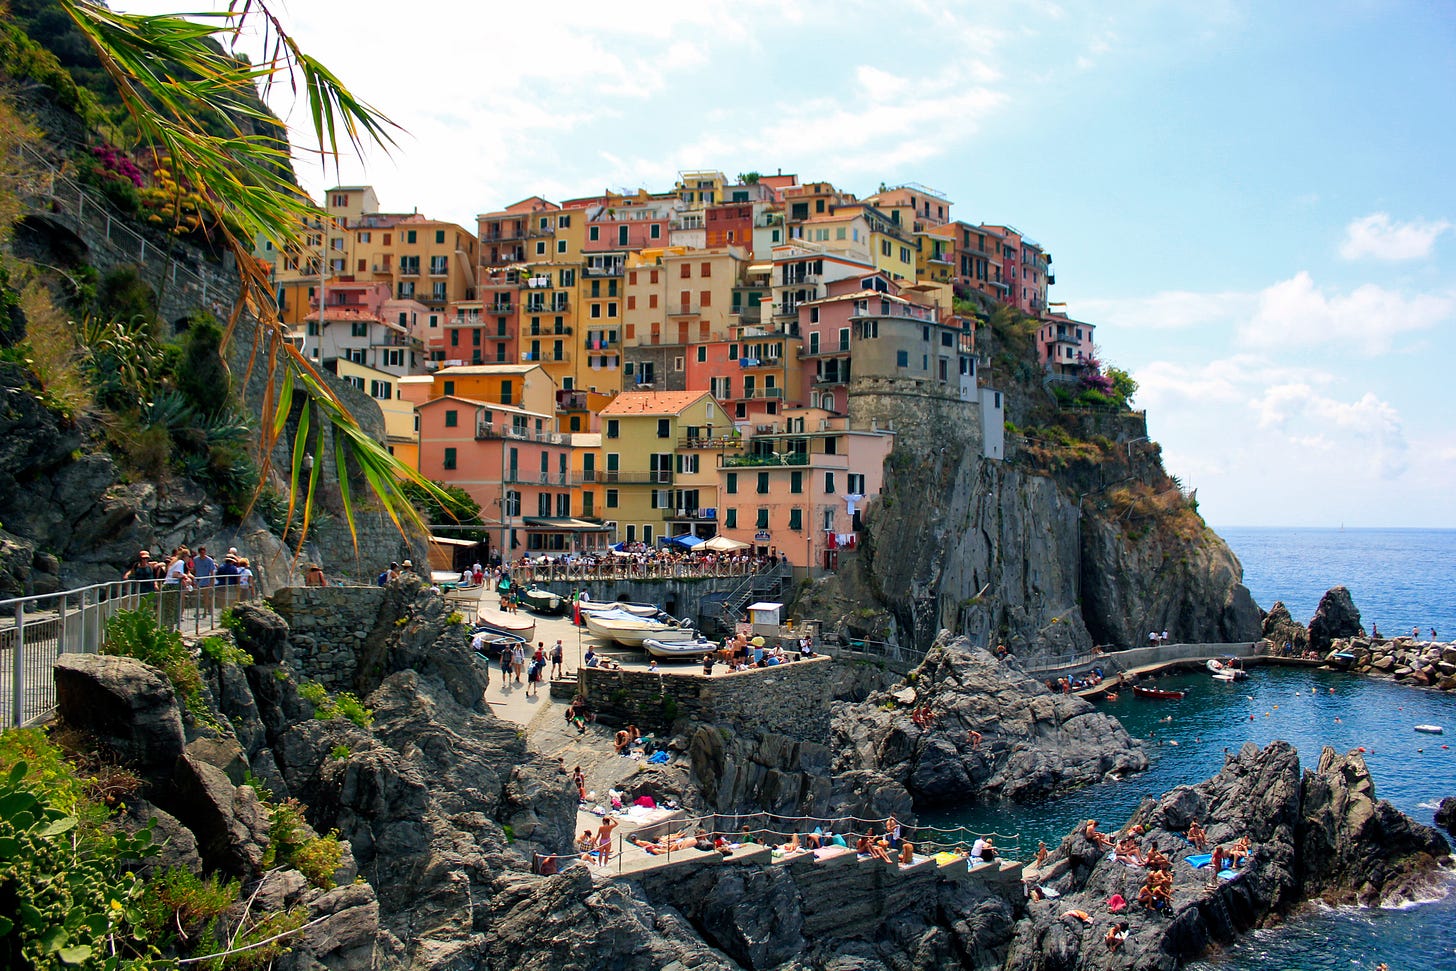 Manarola, Italy, another seaside city with colorful buildings.